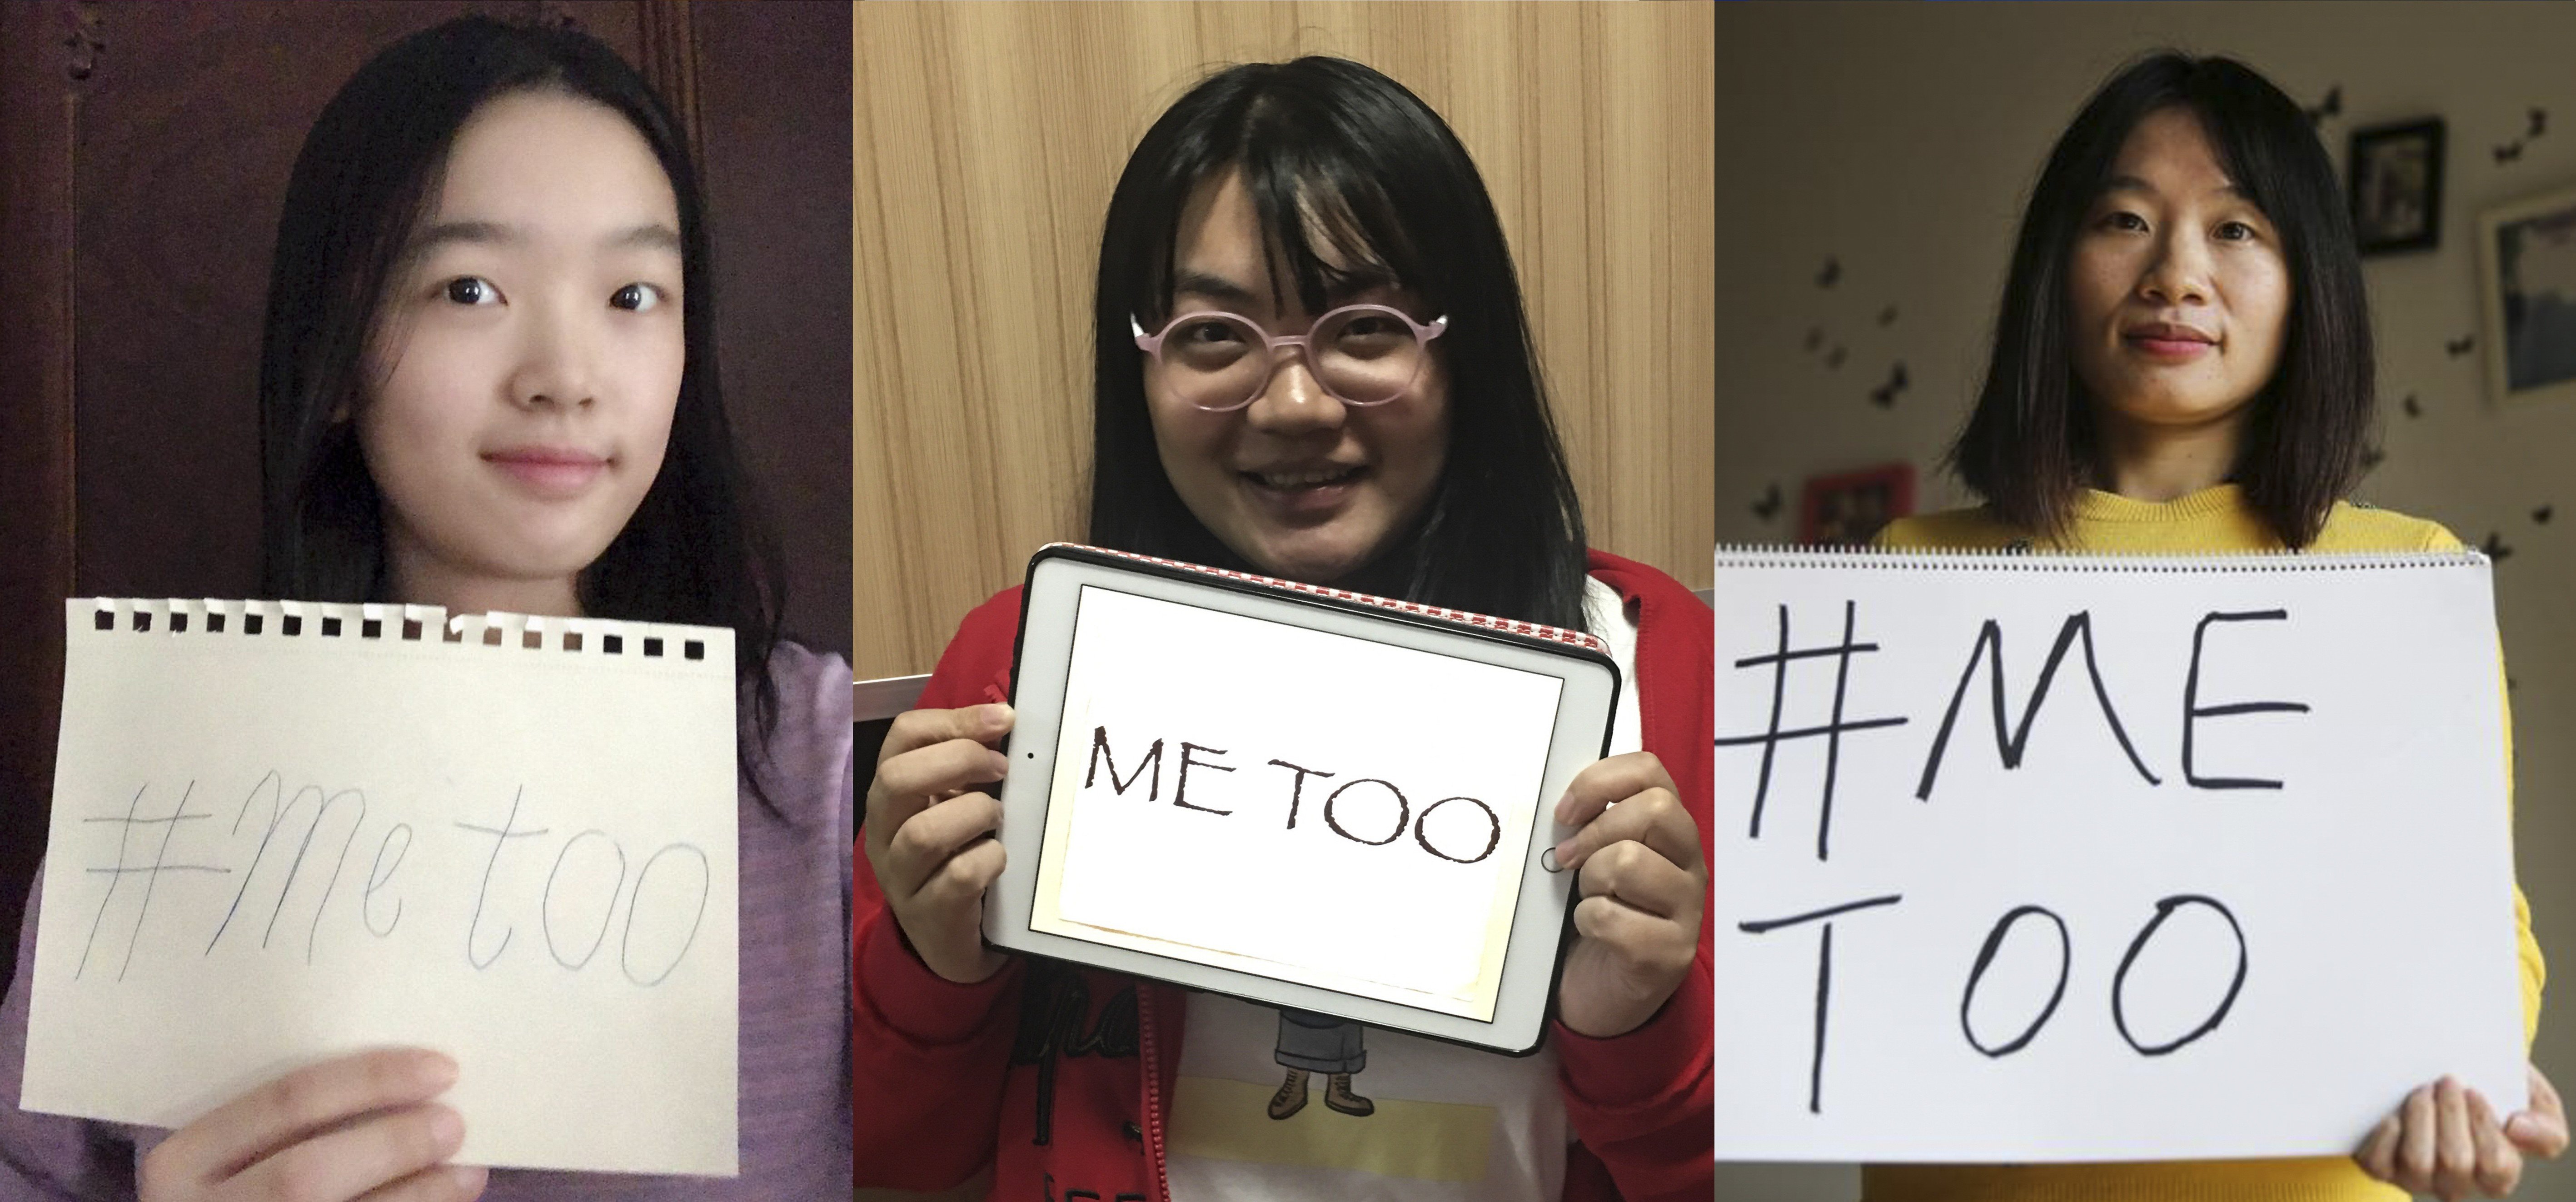 After a slow take-up of the #MeToo campaign in China, students and alumni from dozens of Chinese universities have launched online petitions calling on their schools to draw up policies to prevent sexual harassment on campus. Photo: Handout